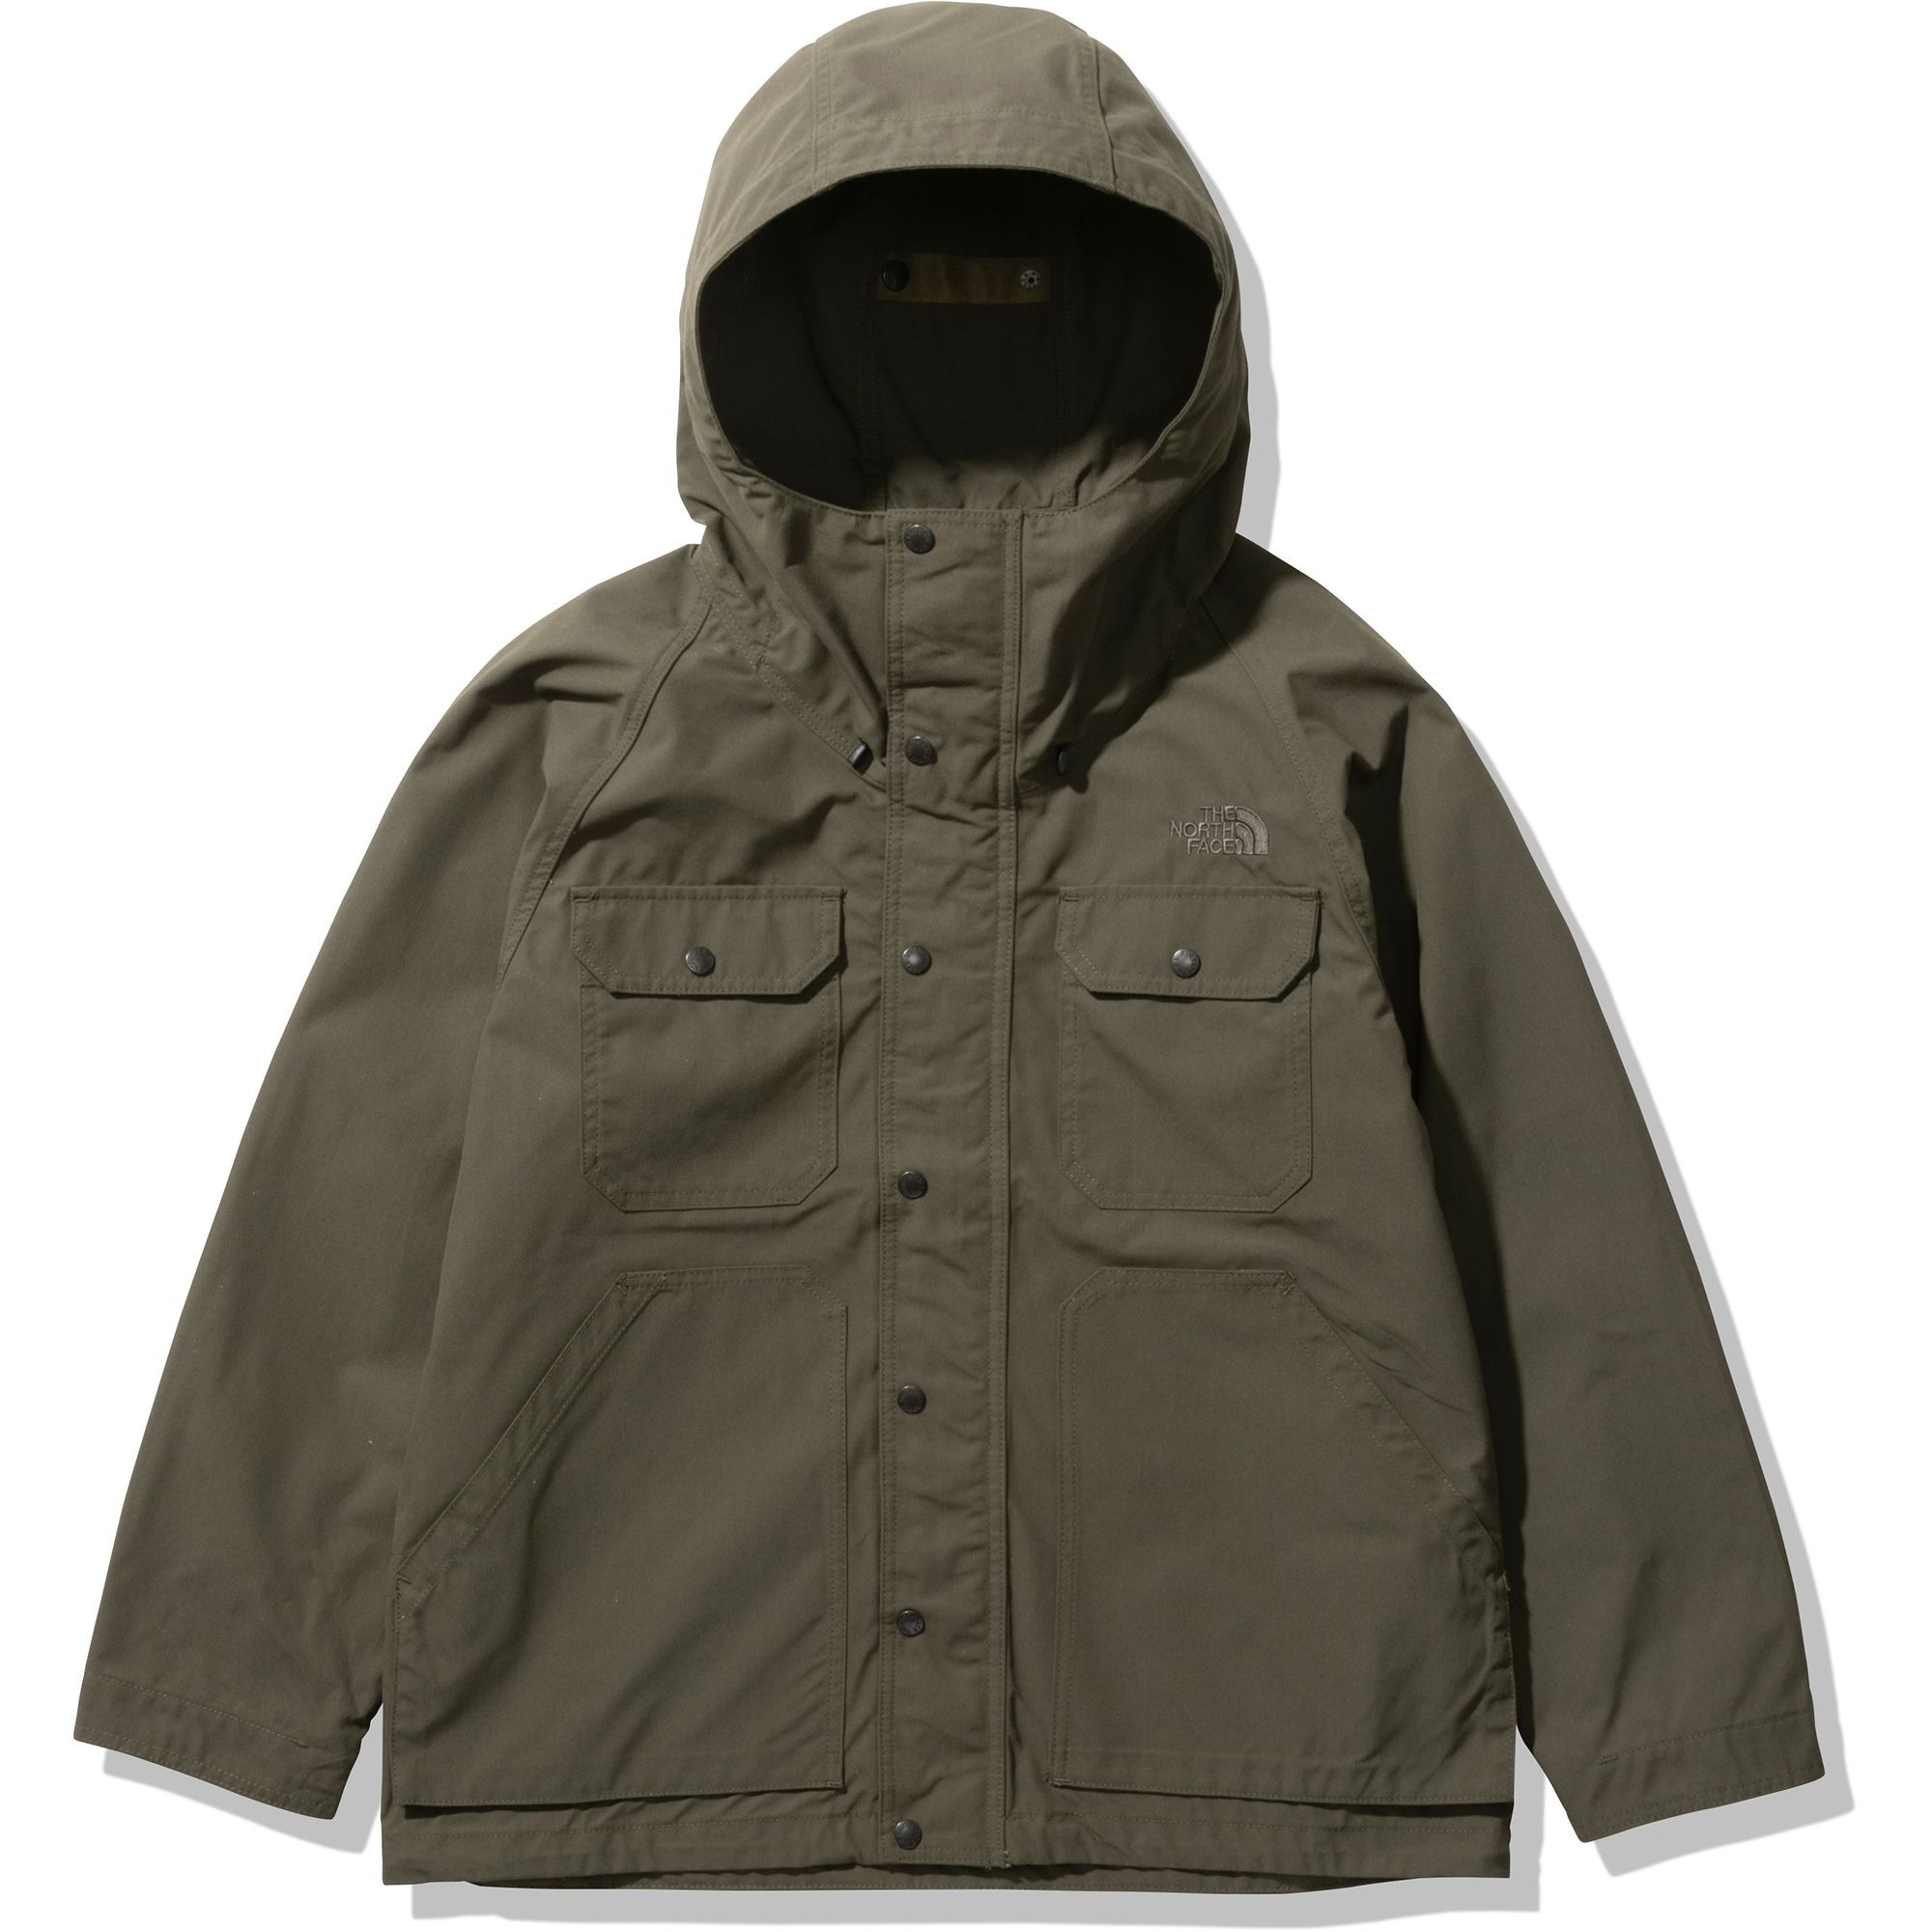 NP72132 日本THE NORTH FACE ZI MAGNE FIREFLY MOUNTAIN PAR